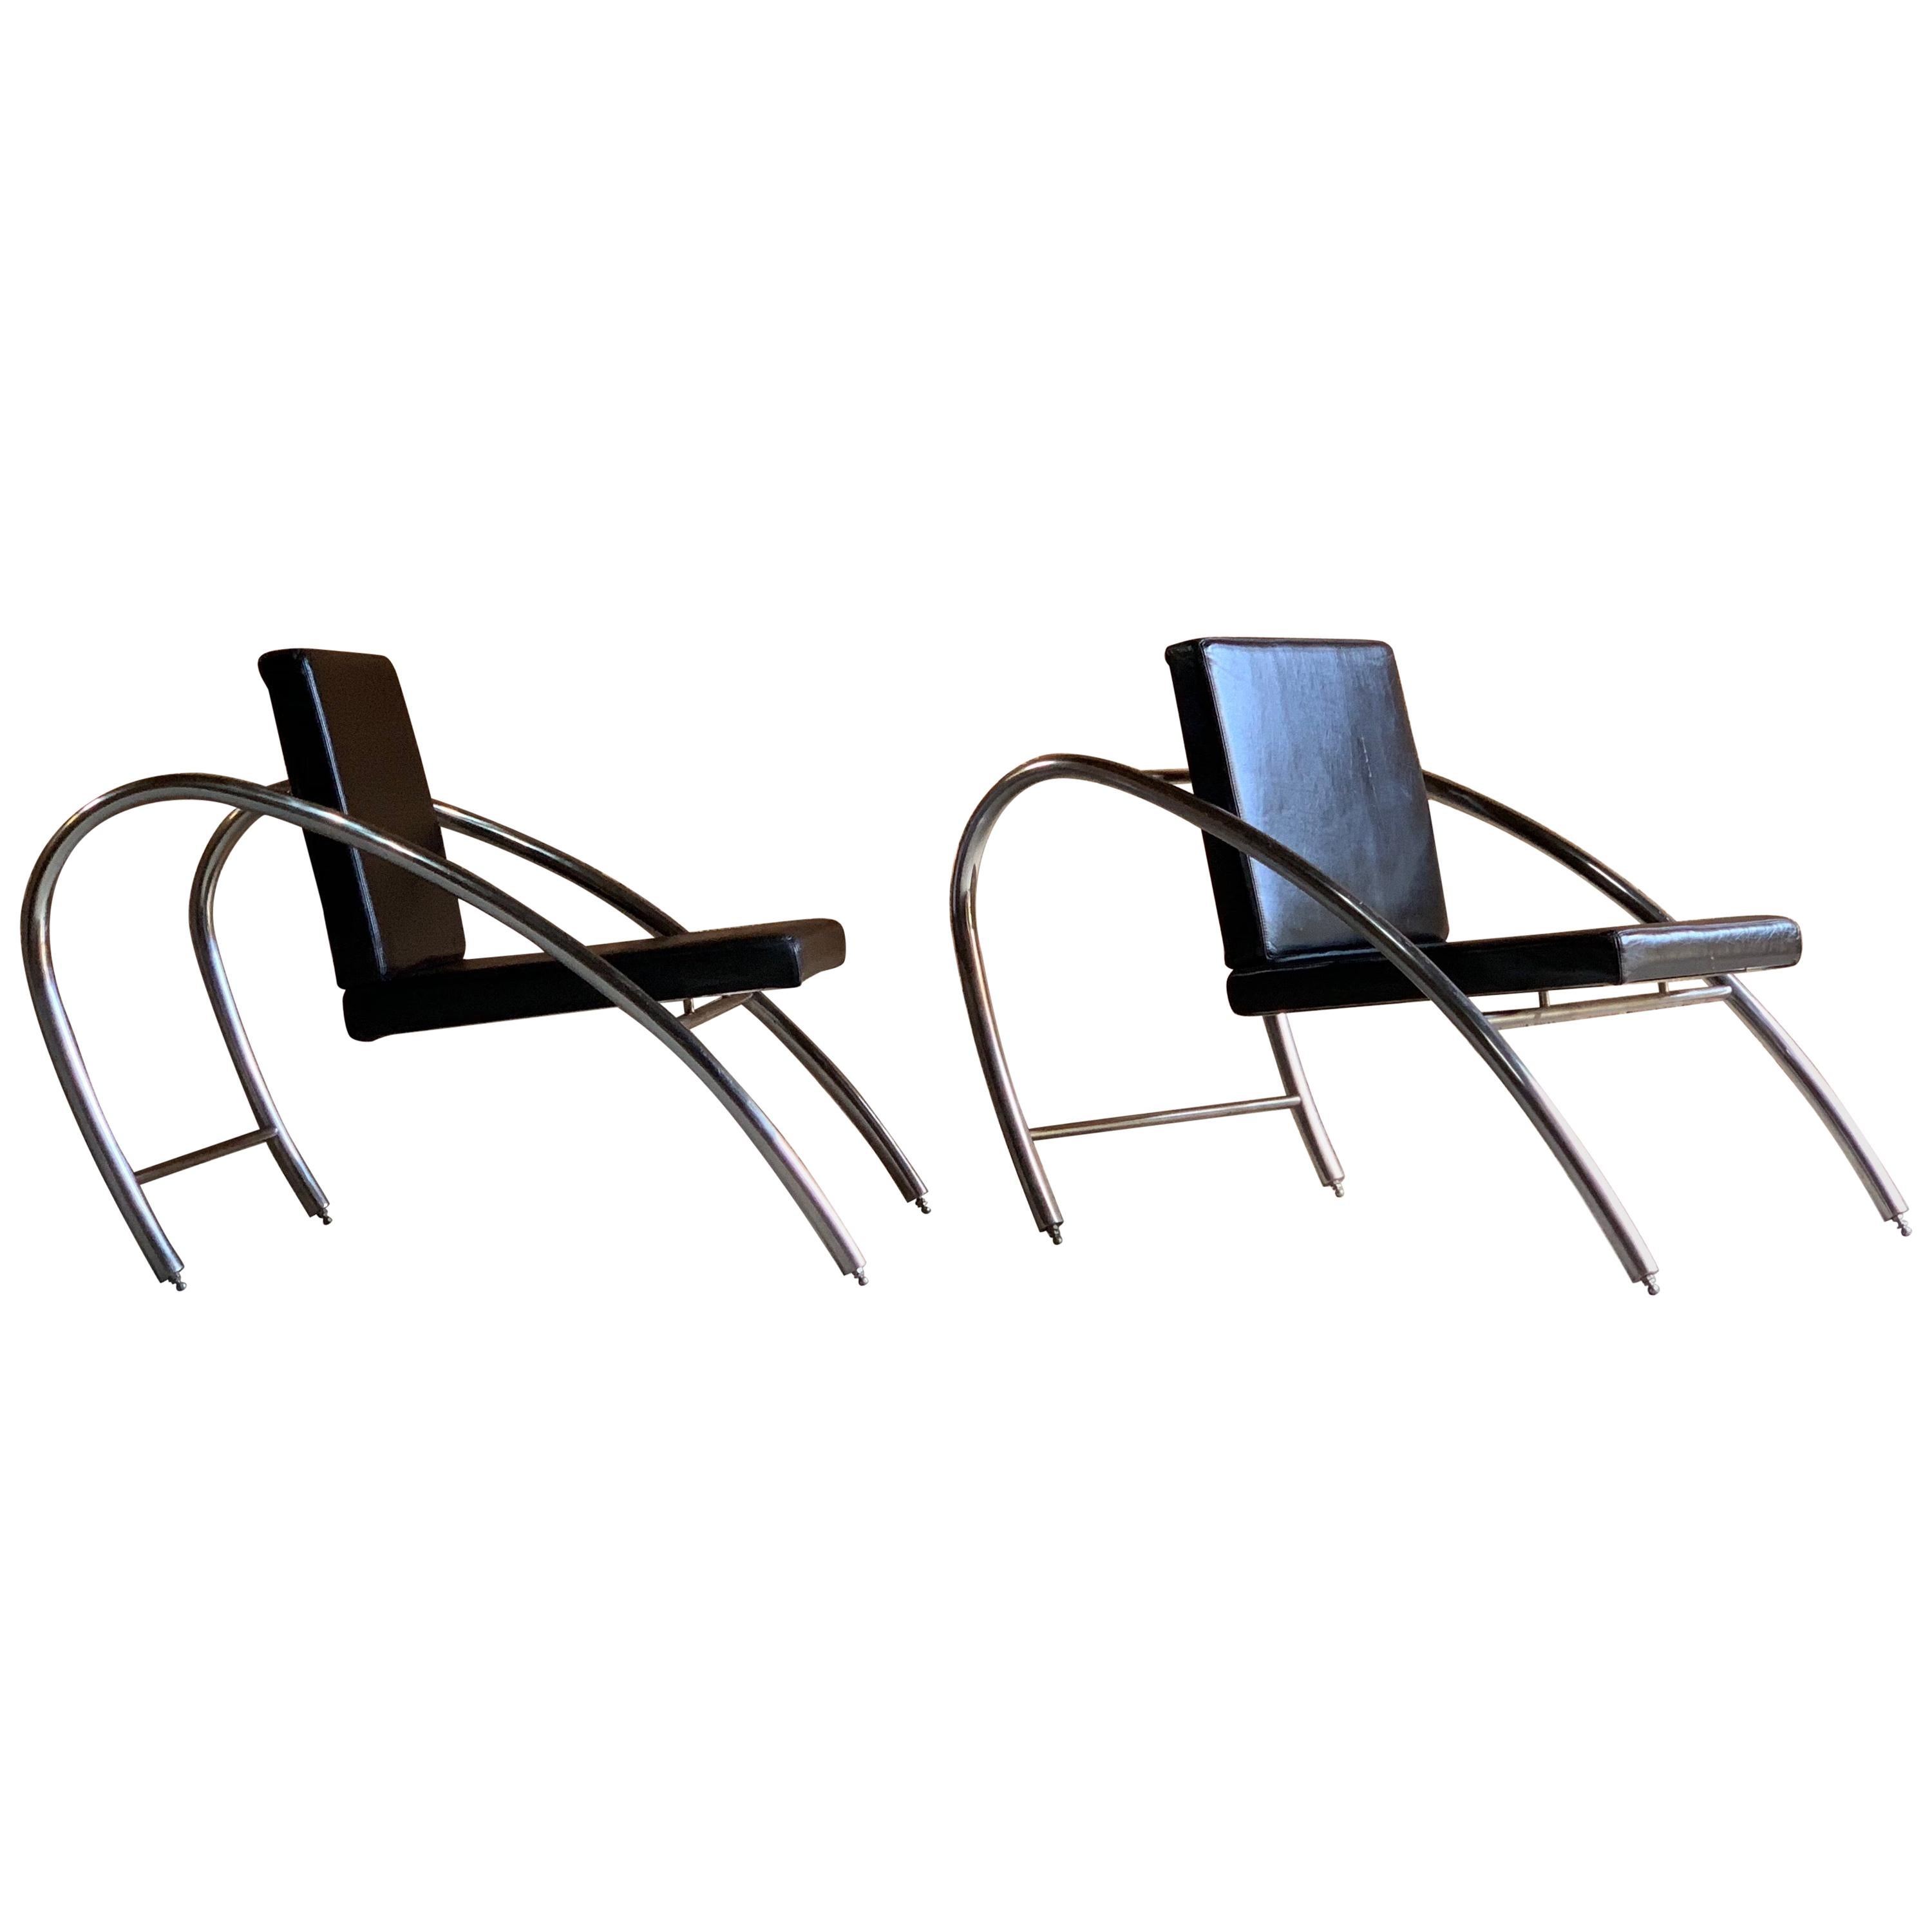 Moreno chrome and leather lounge chairs by Francois Scali & Alain Domingo for Nemo, circa 1983.

A pair of Moreno chrome and leather lounge chairs, designed by Francois Scali and Alain Domingo for Nemo, circa 1983.

Dimensions:

Height 30”